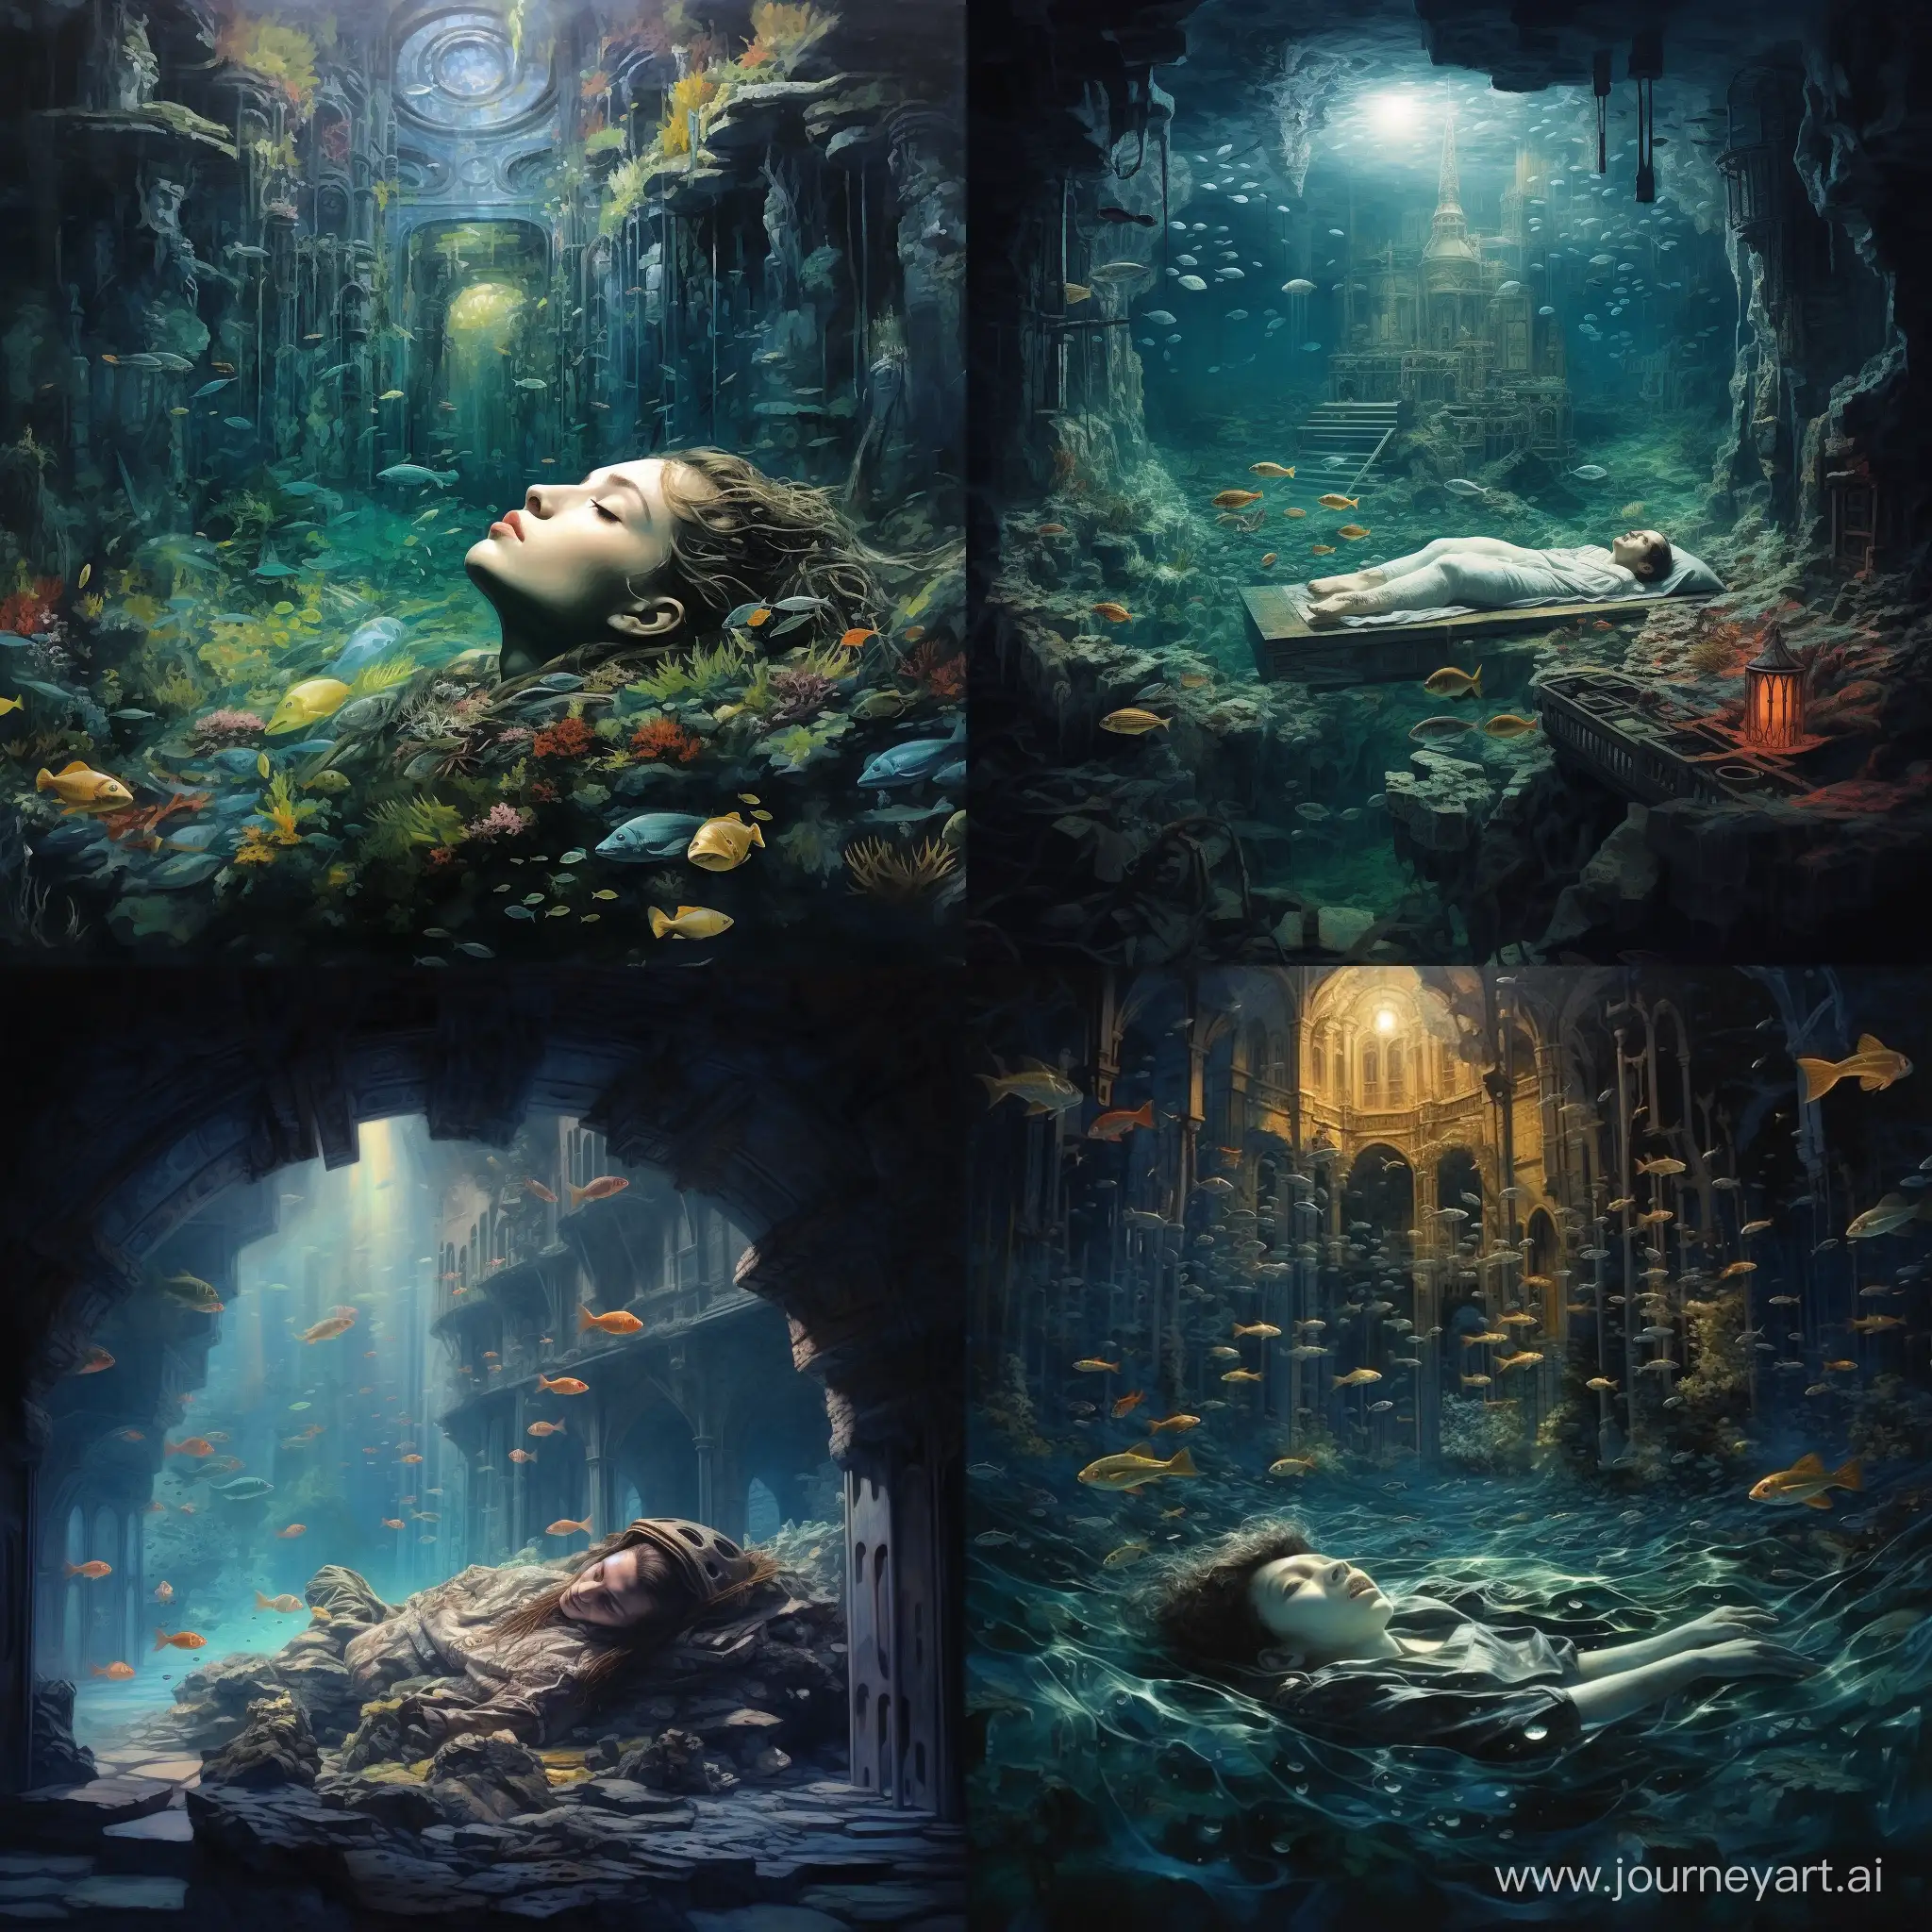 sleeping [вариант] has magical dreams about an underwater ancient, mythical city under water, An incredible, intricate, creative surreal painting style, hyperrealistic